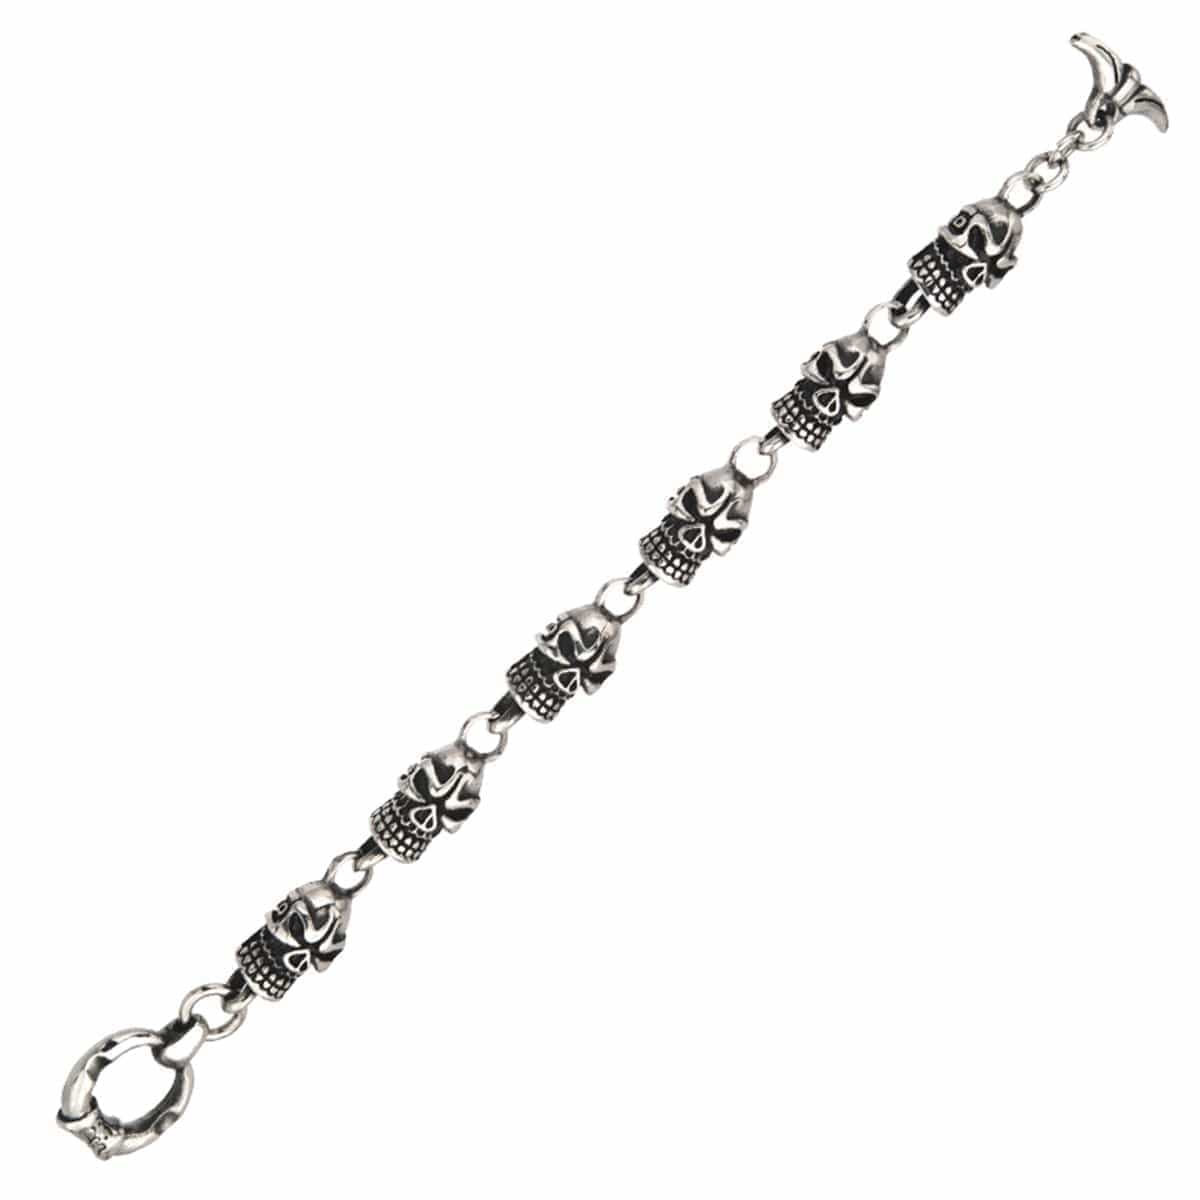 INOX JEWELRY Bracelets Antiqued Silver Tone Stainless Steel Large Skull Toggle Bracelet BR70